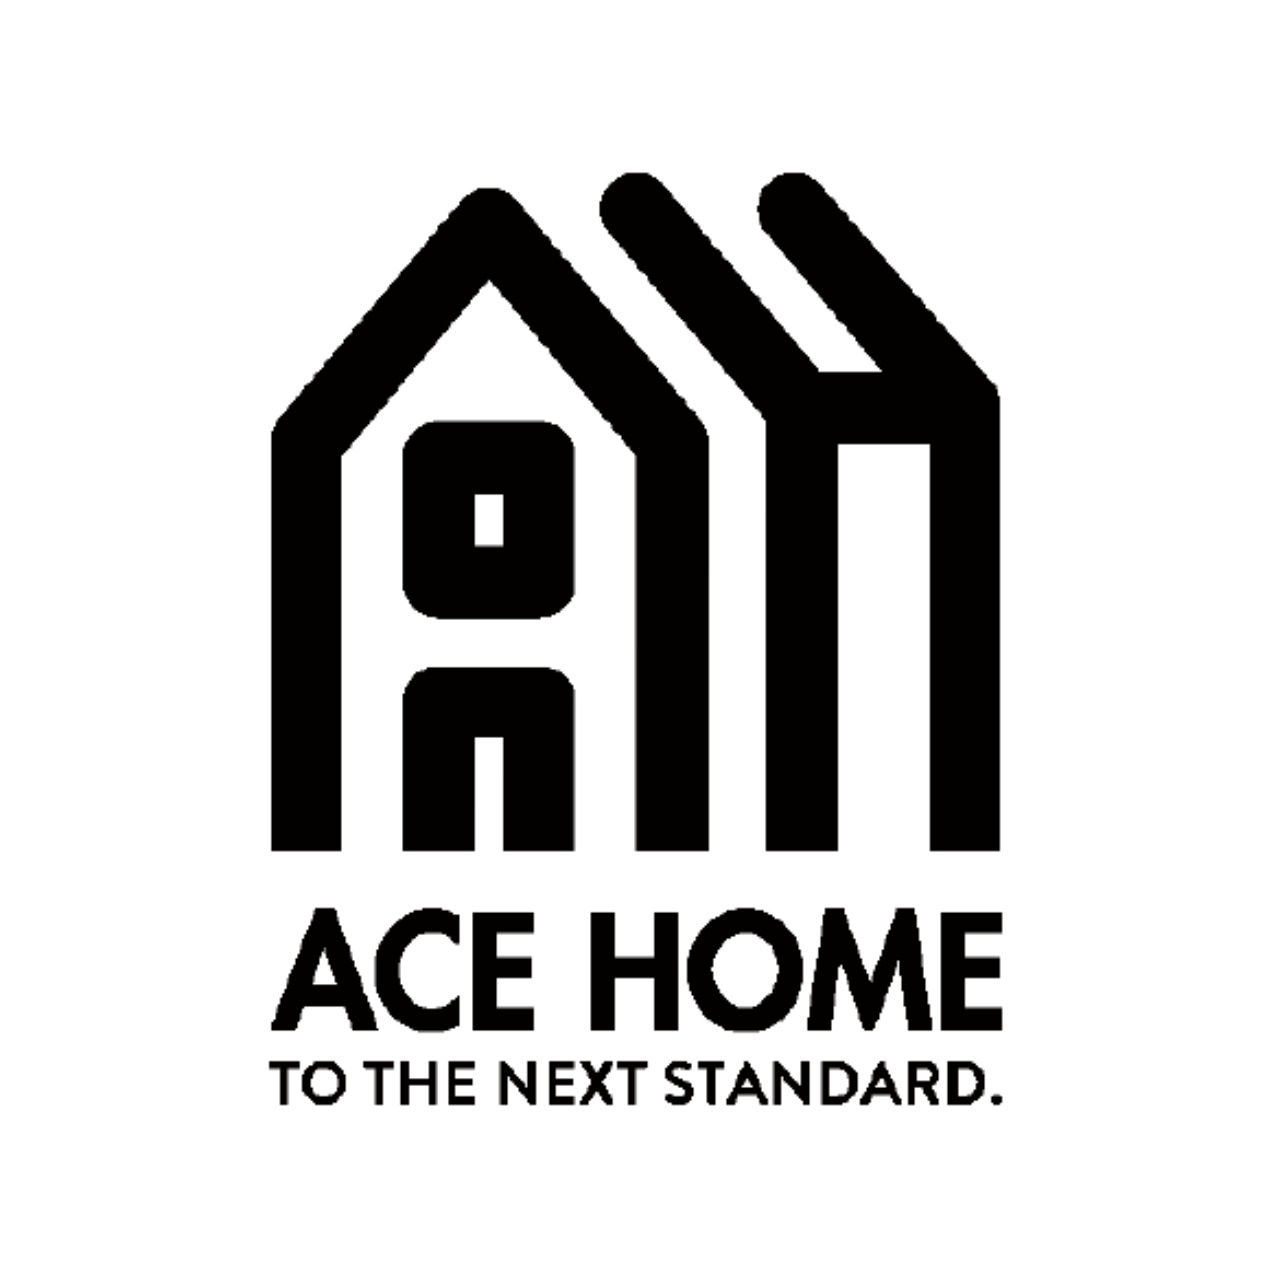 ACEHOME山梨のロゴ画像